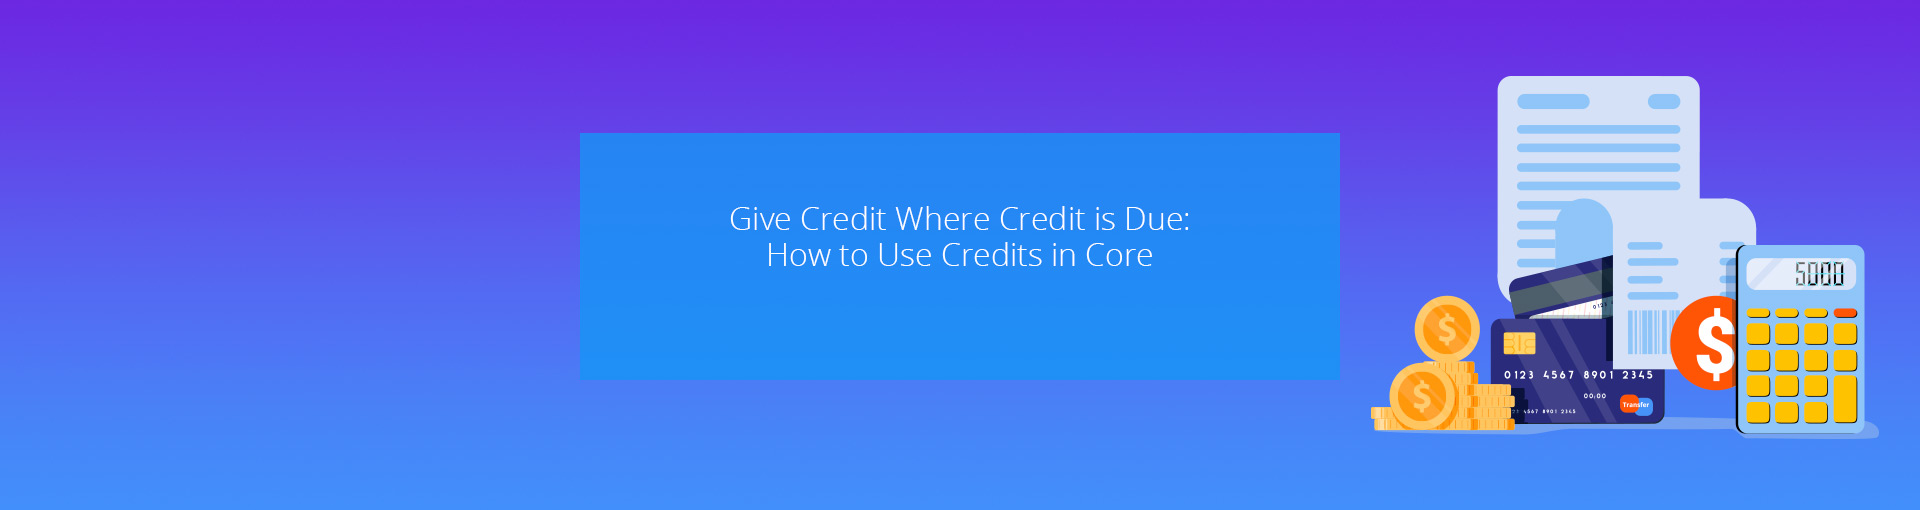 Give Credit Where Credit is Due: How to Use Credits in CORE Featured Image